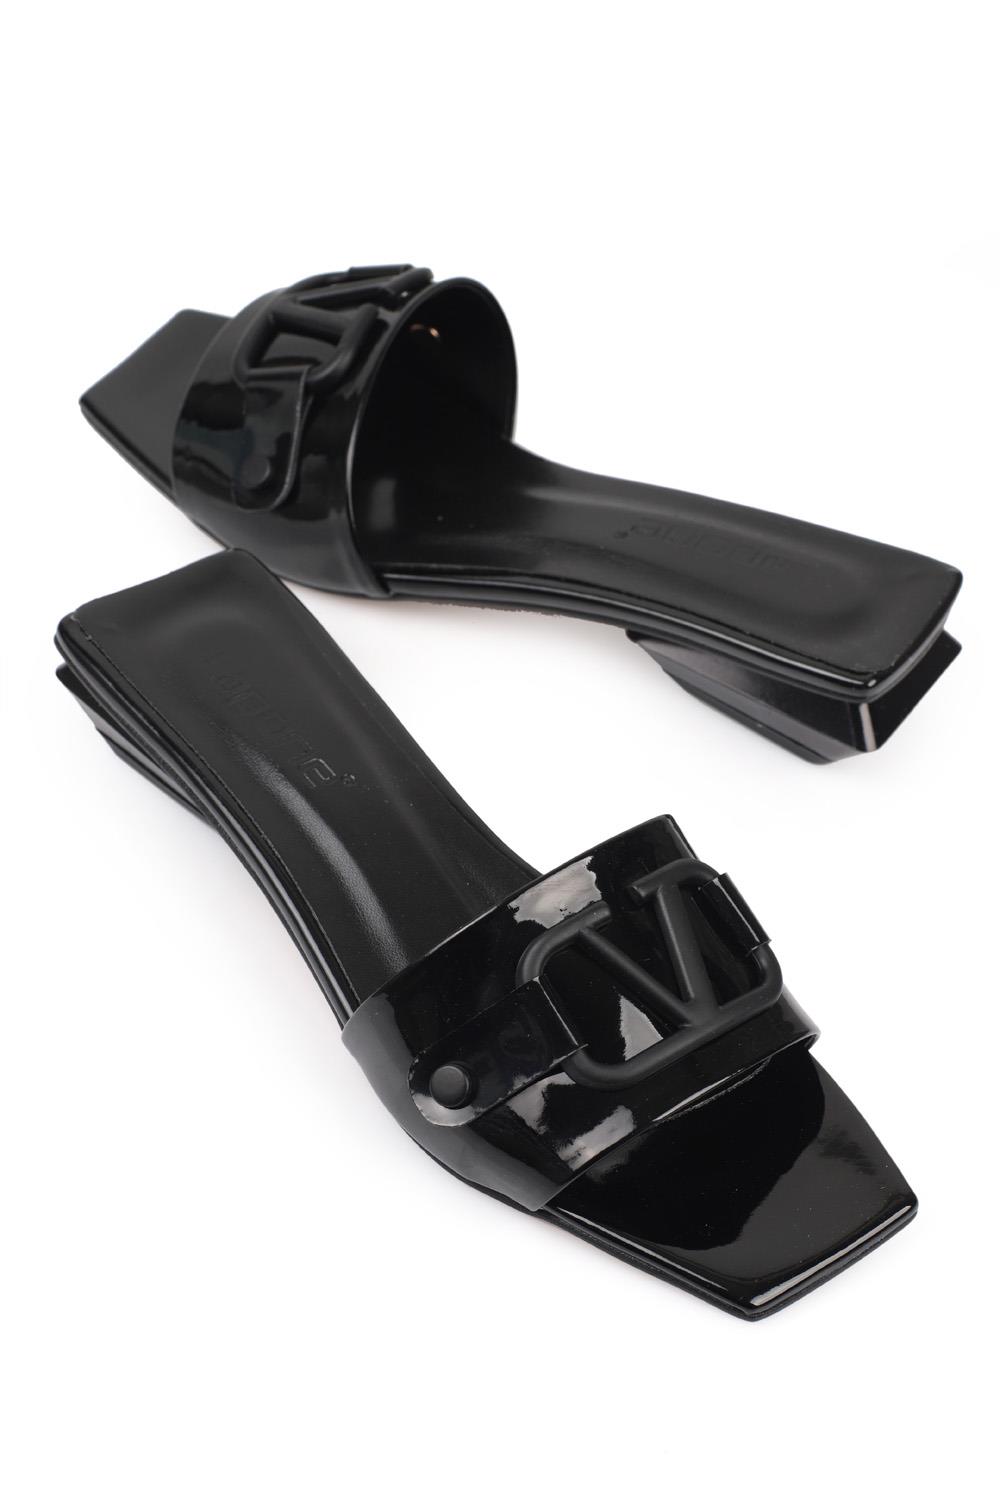 Capone Low Heel V Buckle Patent Leather Woman Sandals